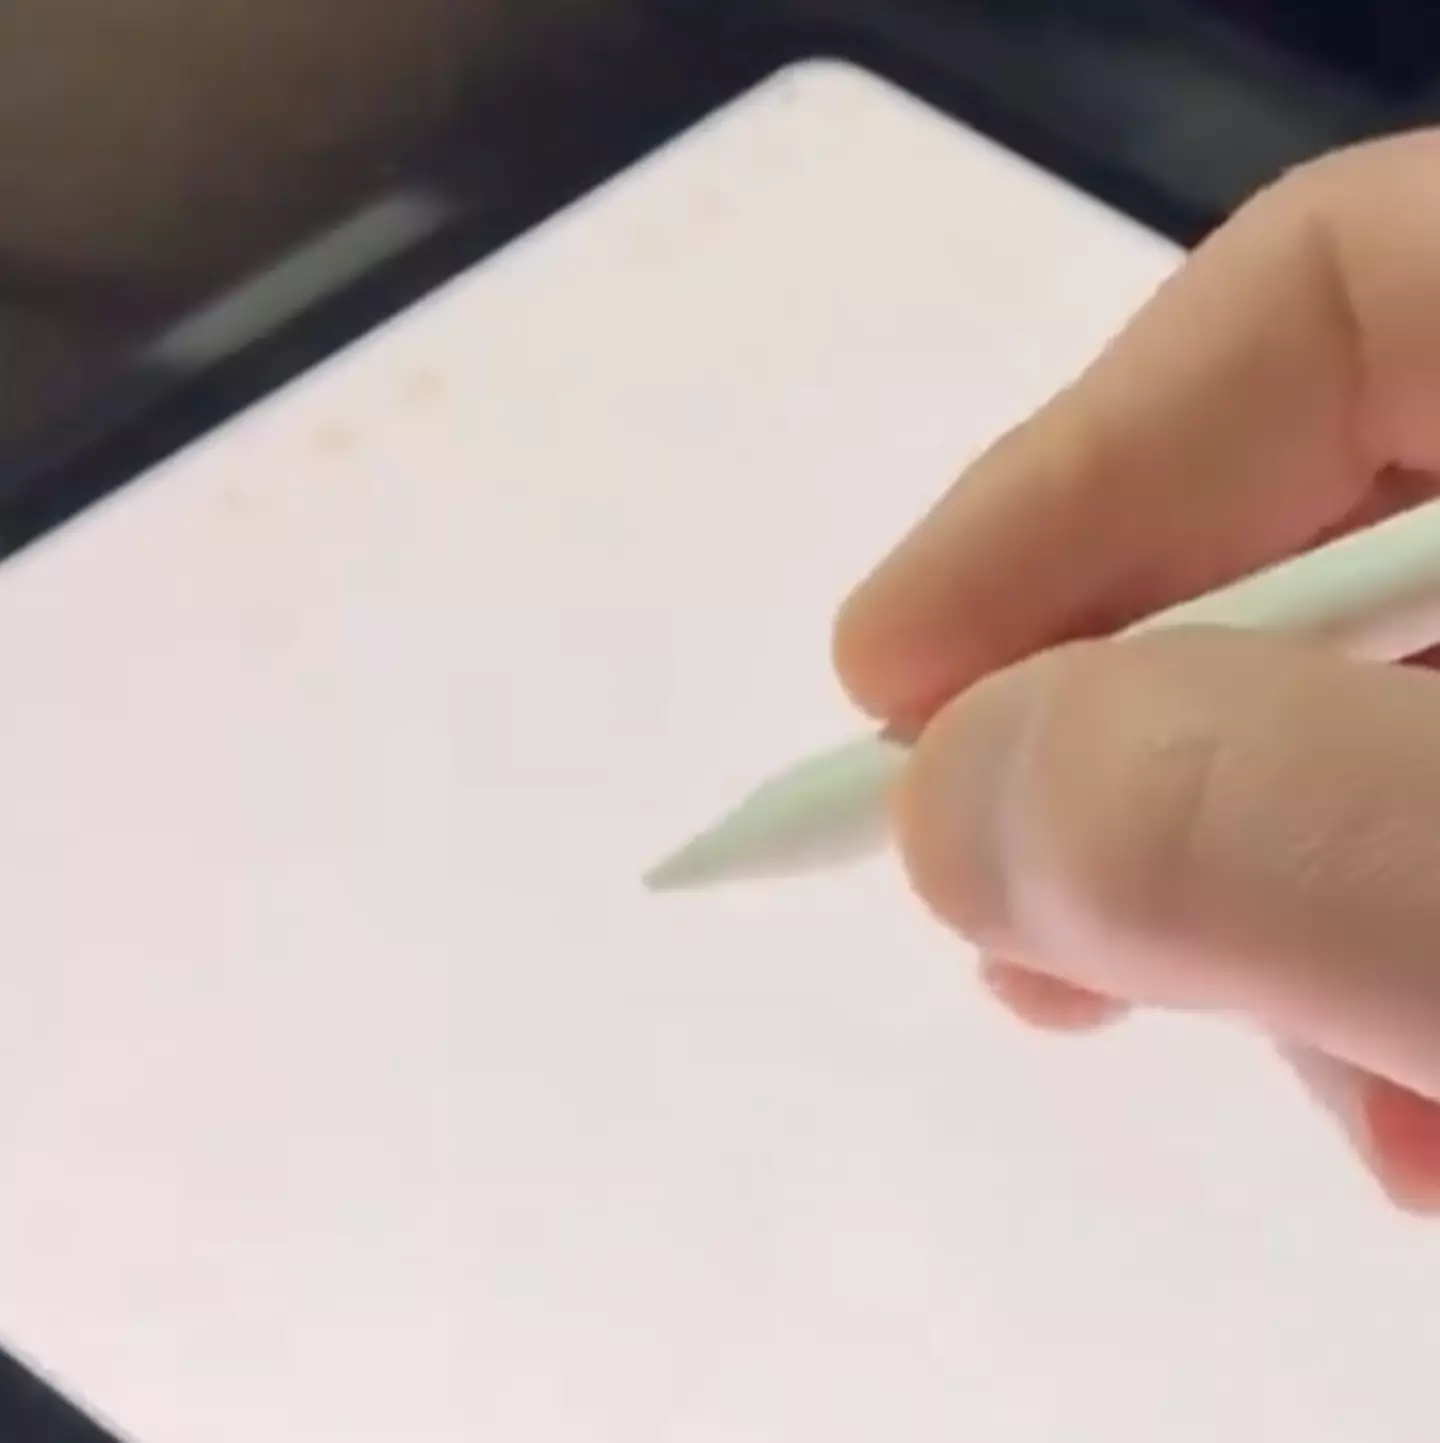 Apple adds super clever ‘hidden’ detail to the iPad Pro that users are loving